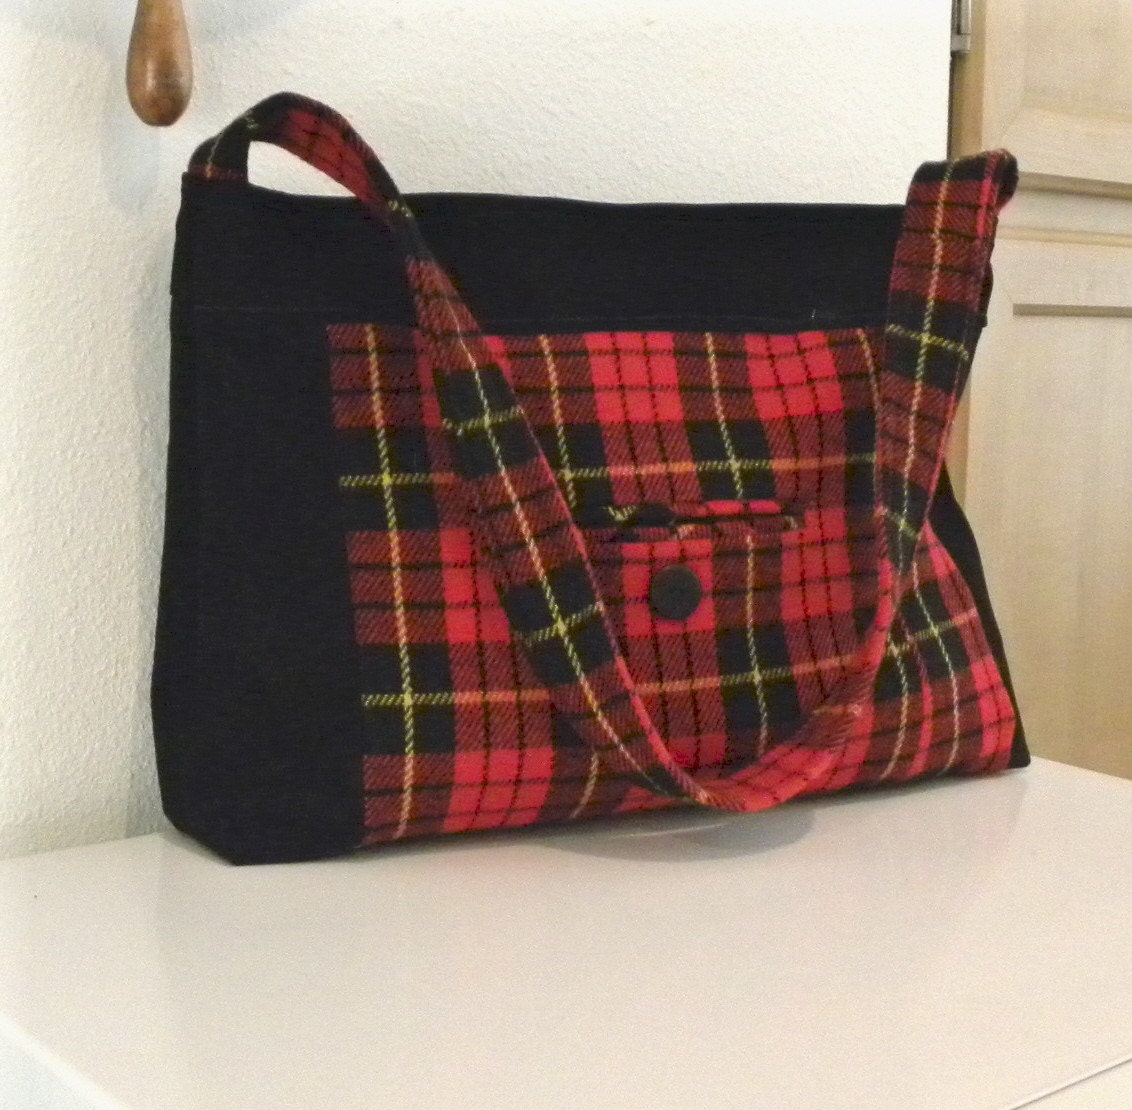 Handmade from a Black Leather Jacket and Scottish Red Plaid Jacket - Handbag - Tote Bag - Purse